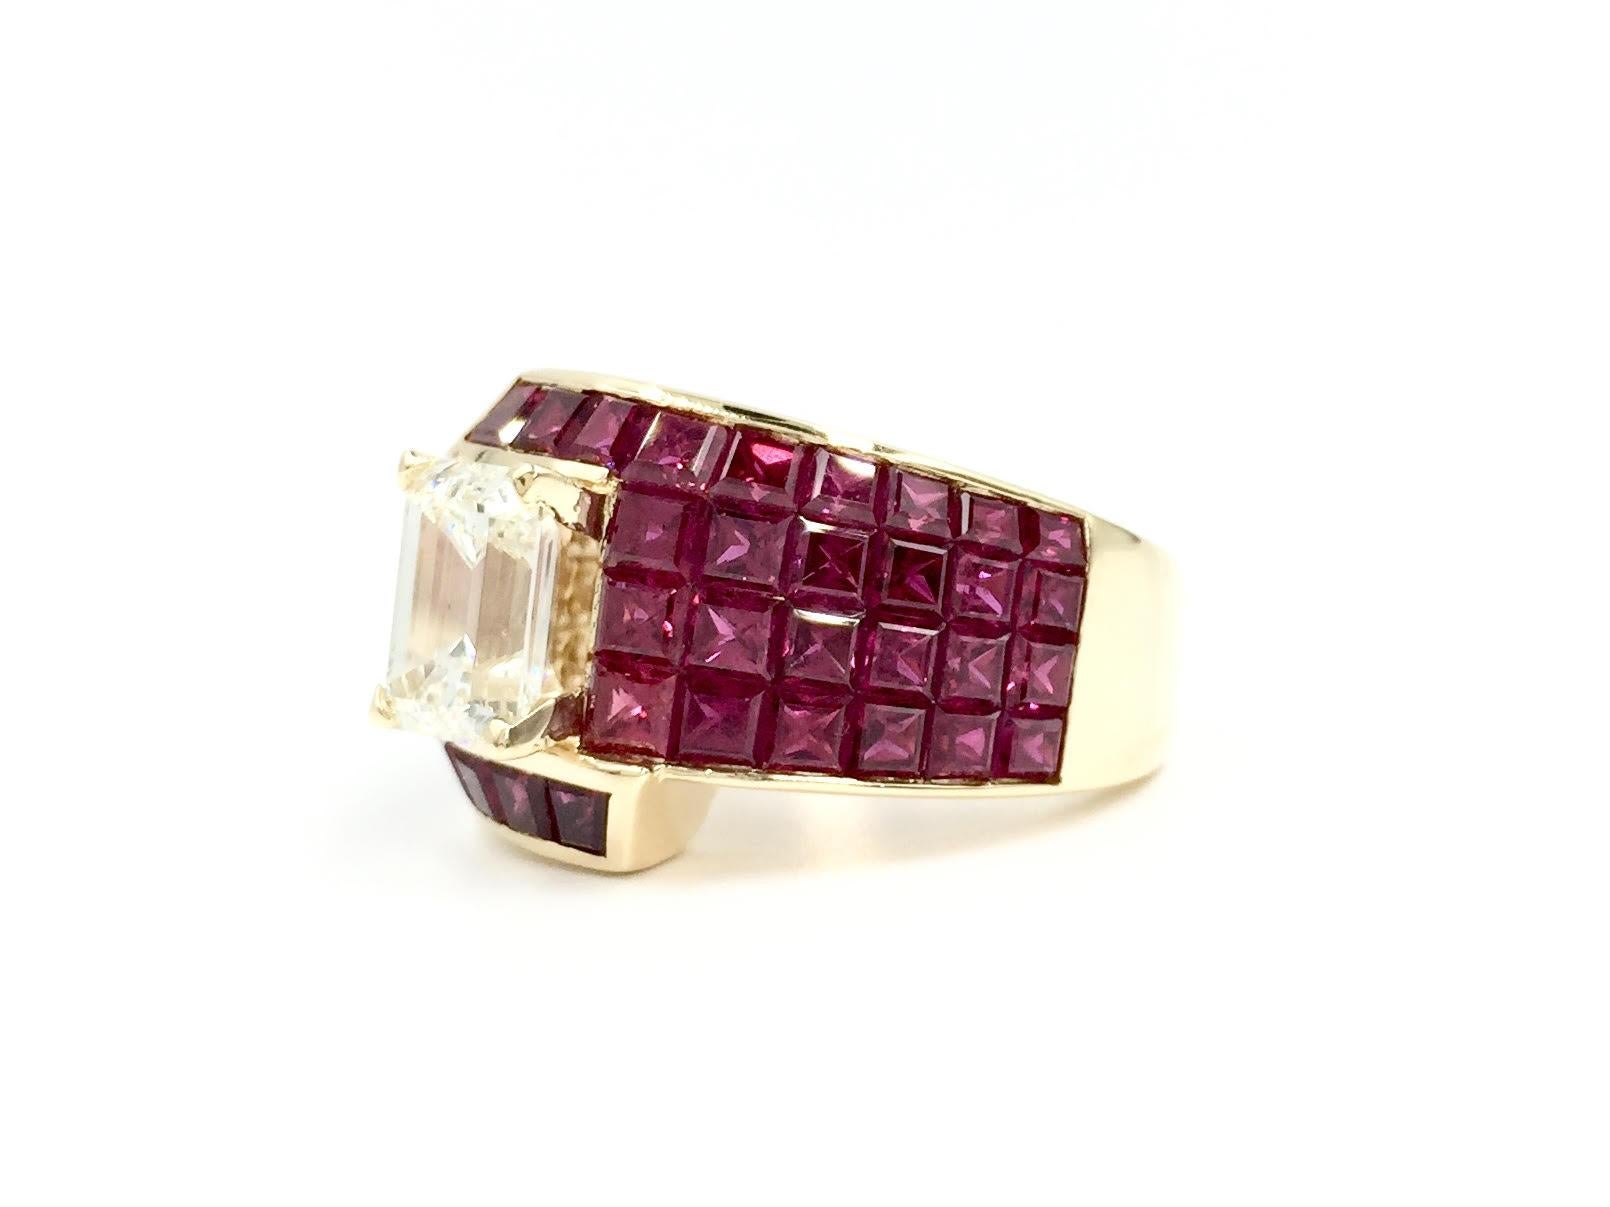 An absolute show-stopper featuring a beautiful 1.65 carat emerald cut diamond surrounded by 7.74 carats of gorgeous princess cut rubies. Vivid red rubies have a very slight purple/magenta hue found in the finest rubies which are expertly invisibly